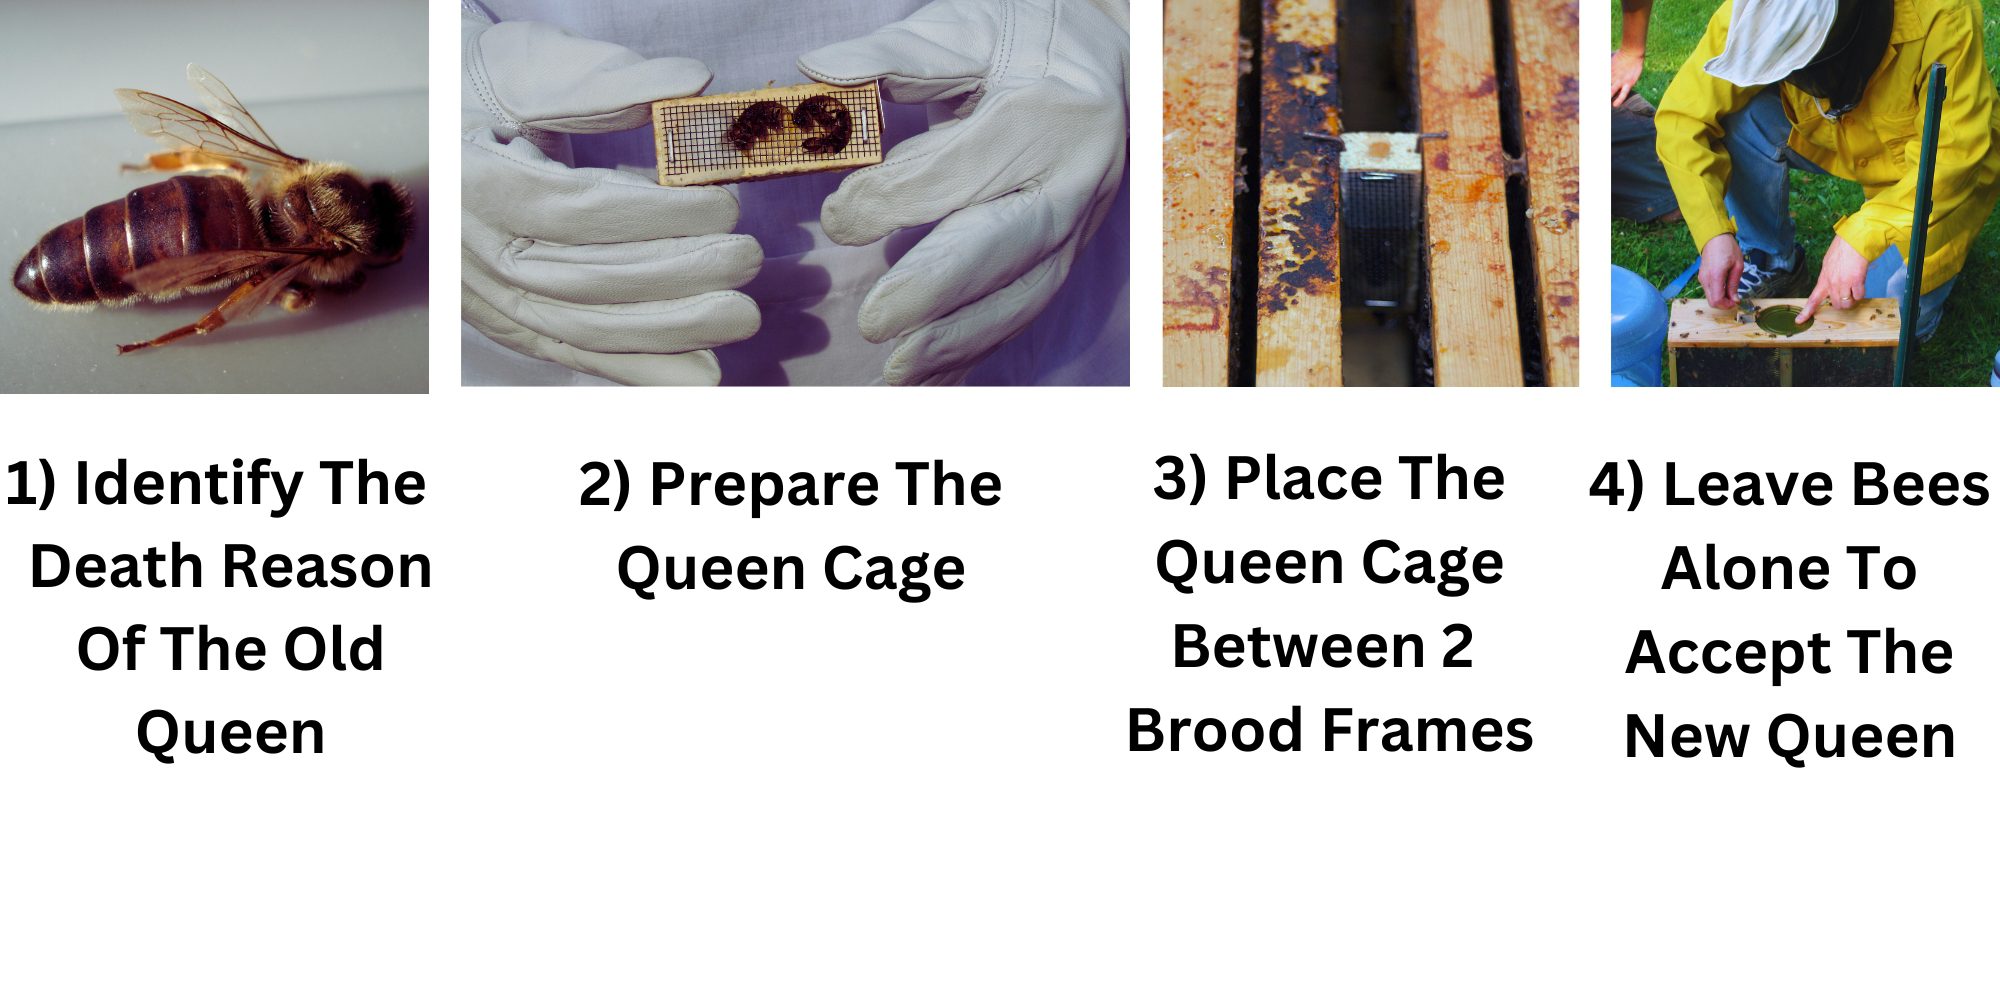 4 Steps To Requeen A Queenless Hive